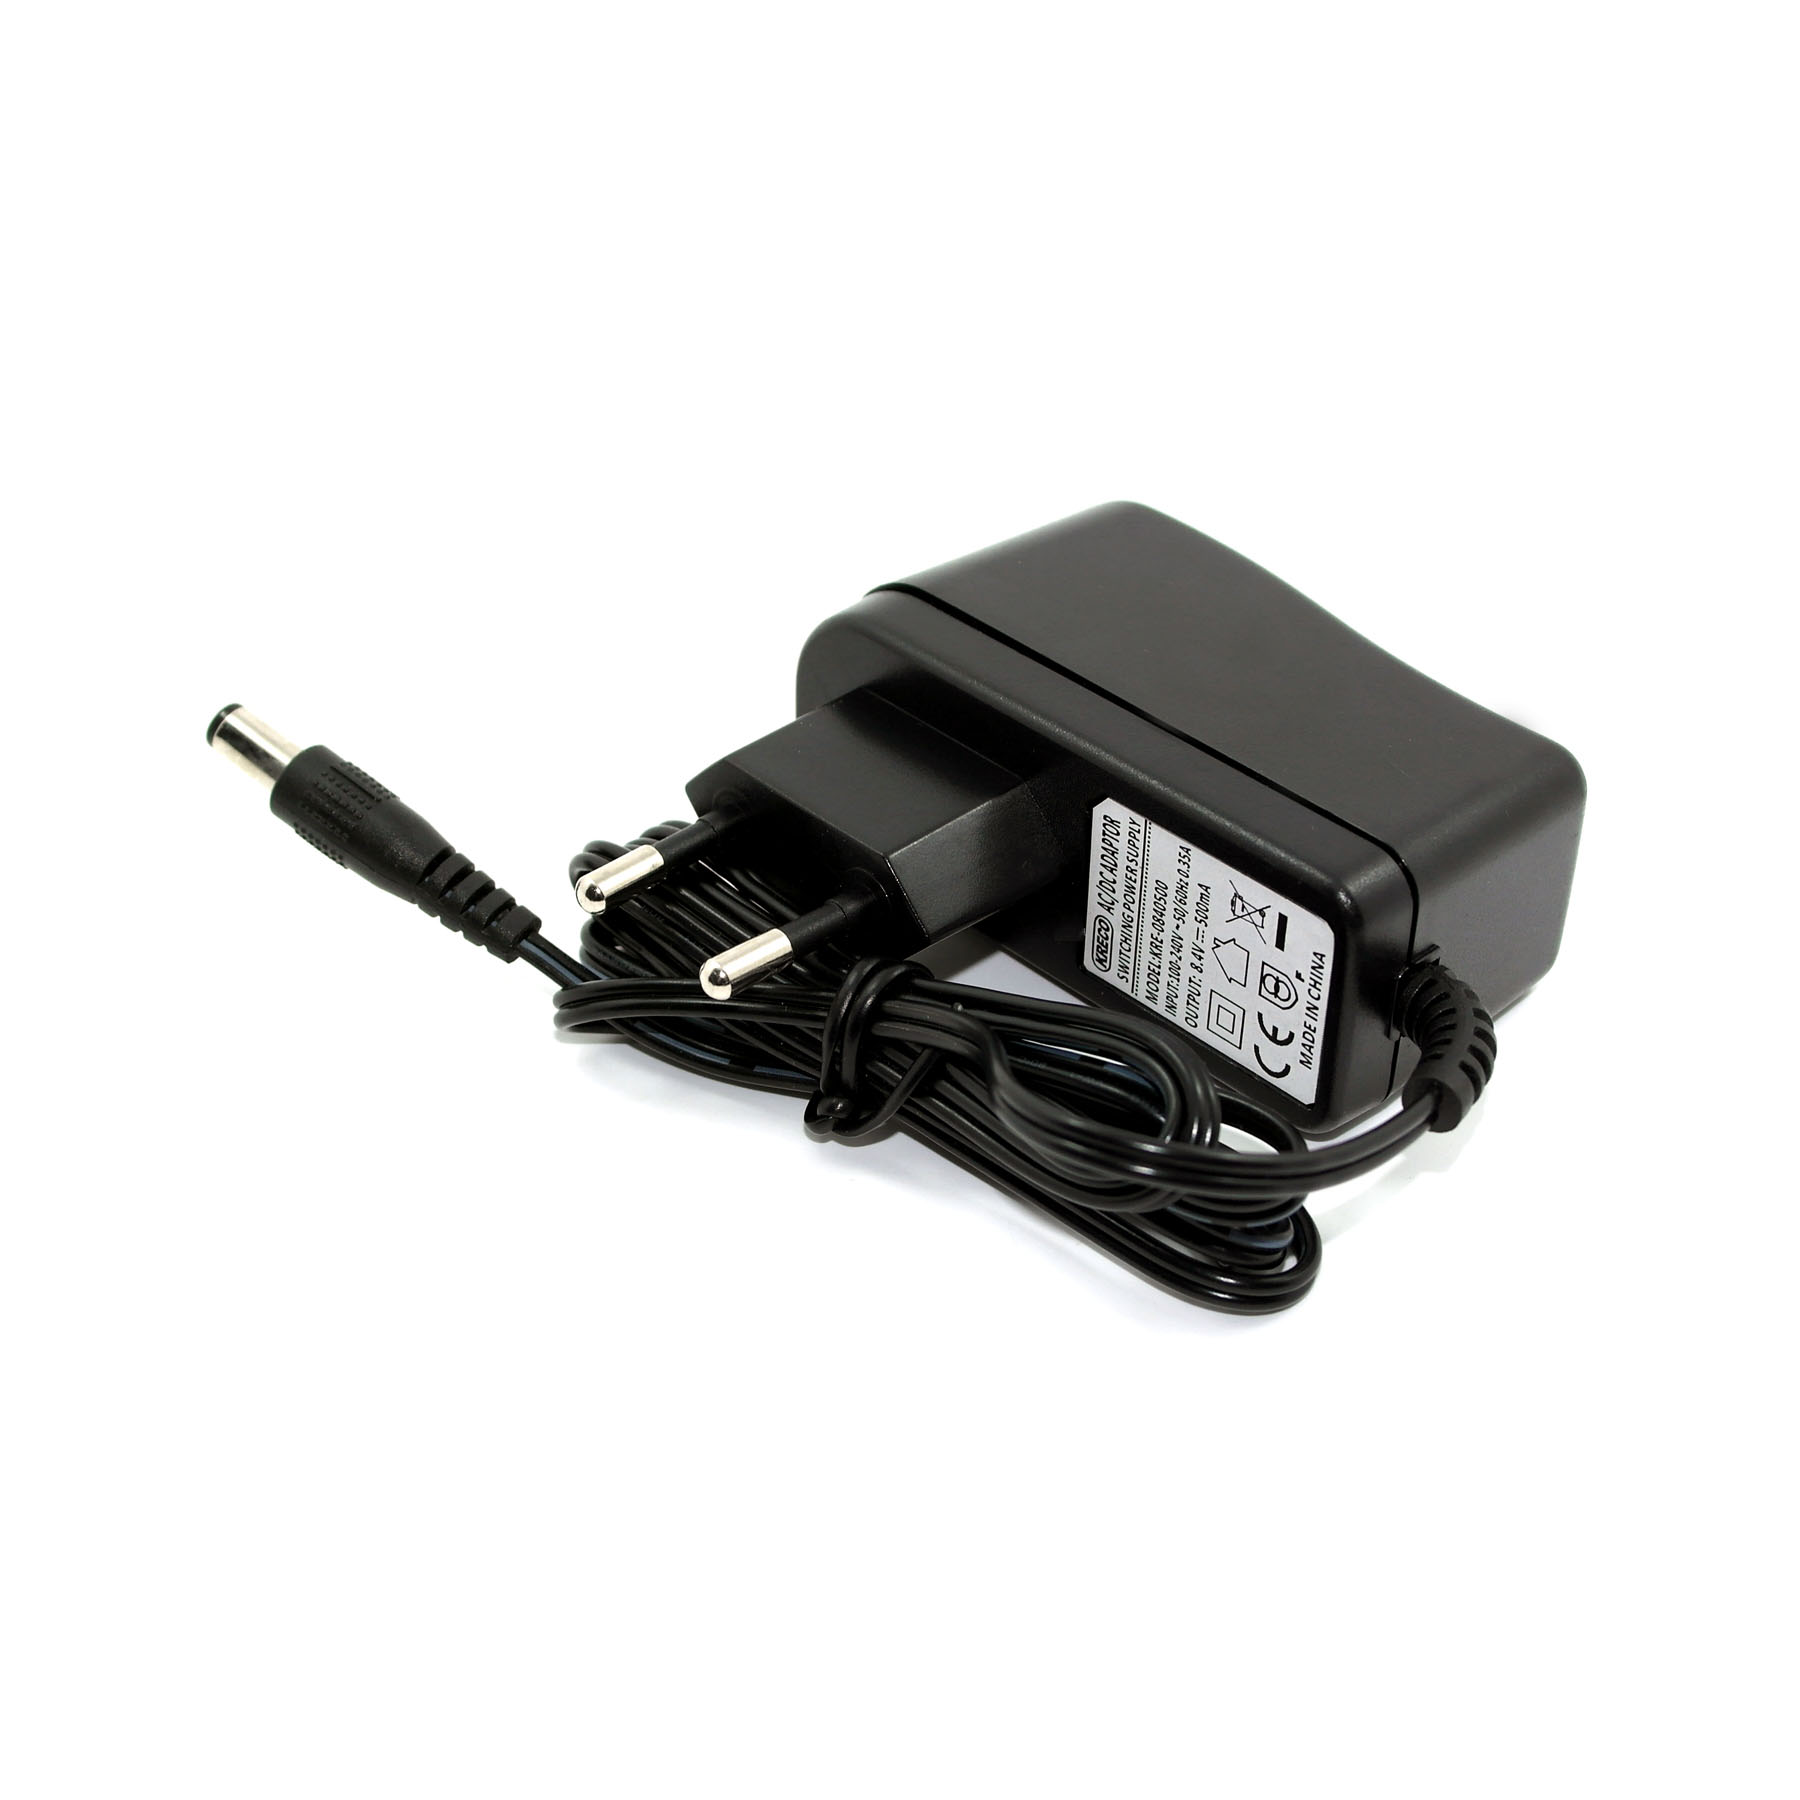 8.4V 0.5A power supply, 8.4V 0.5A charger